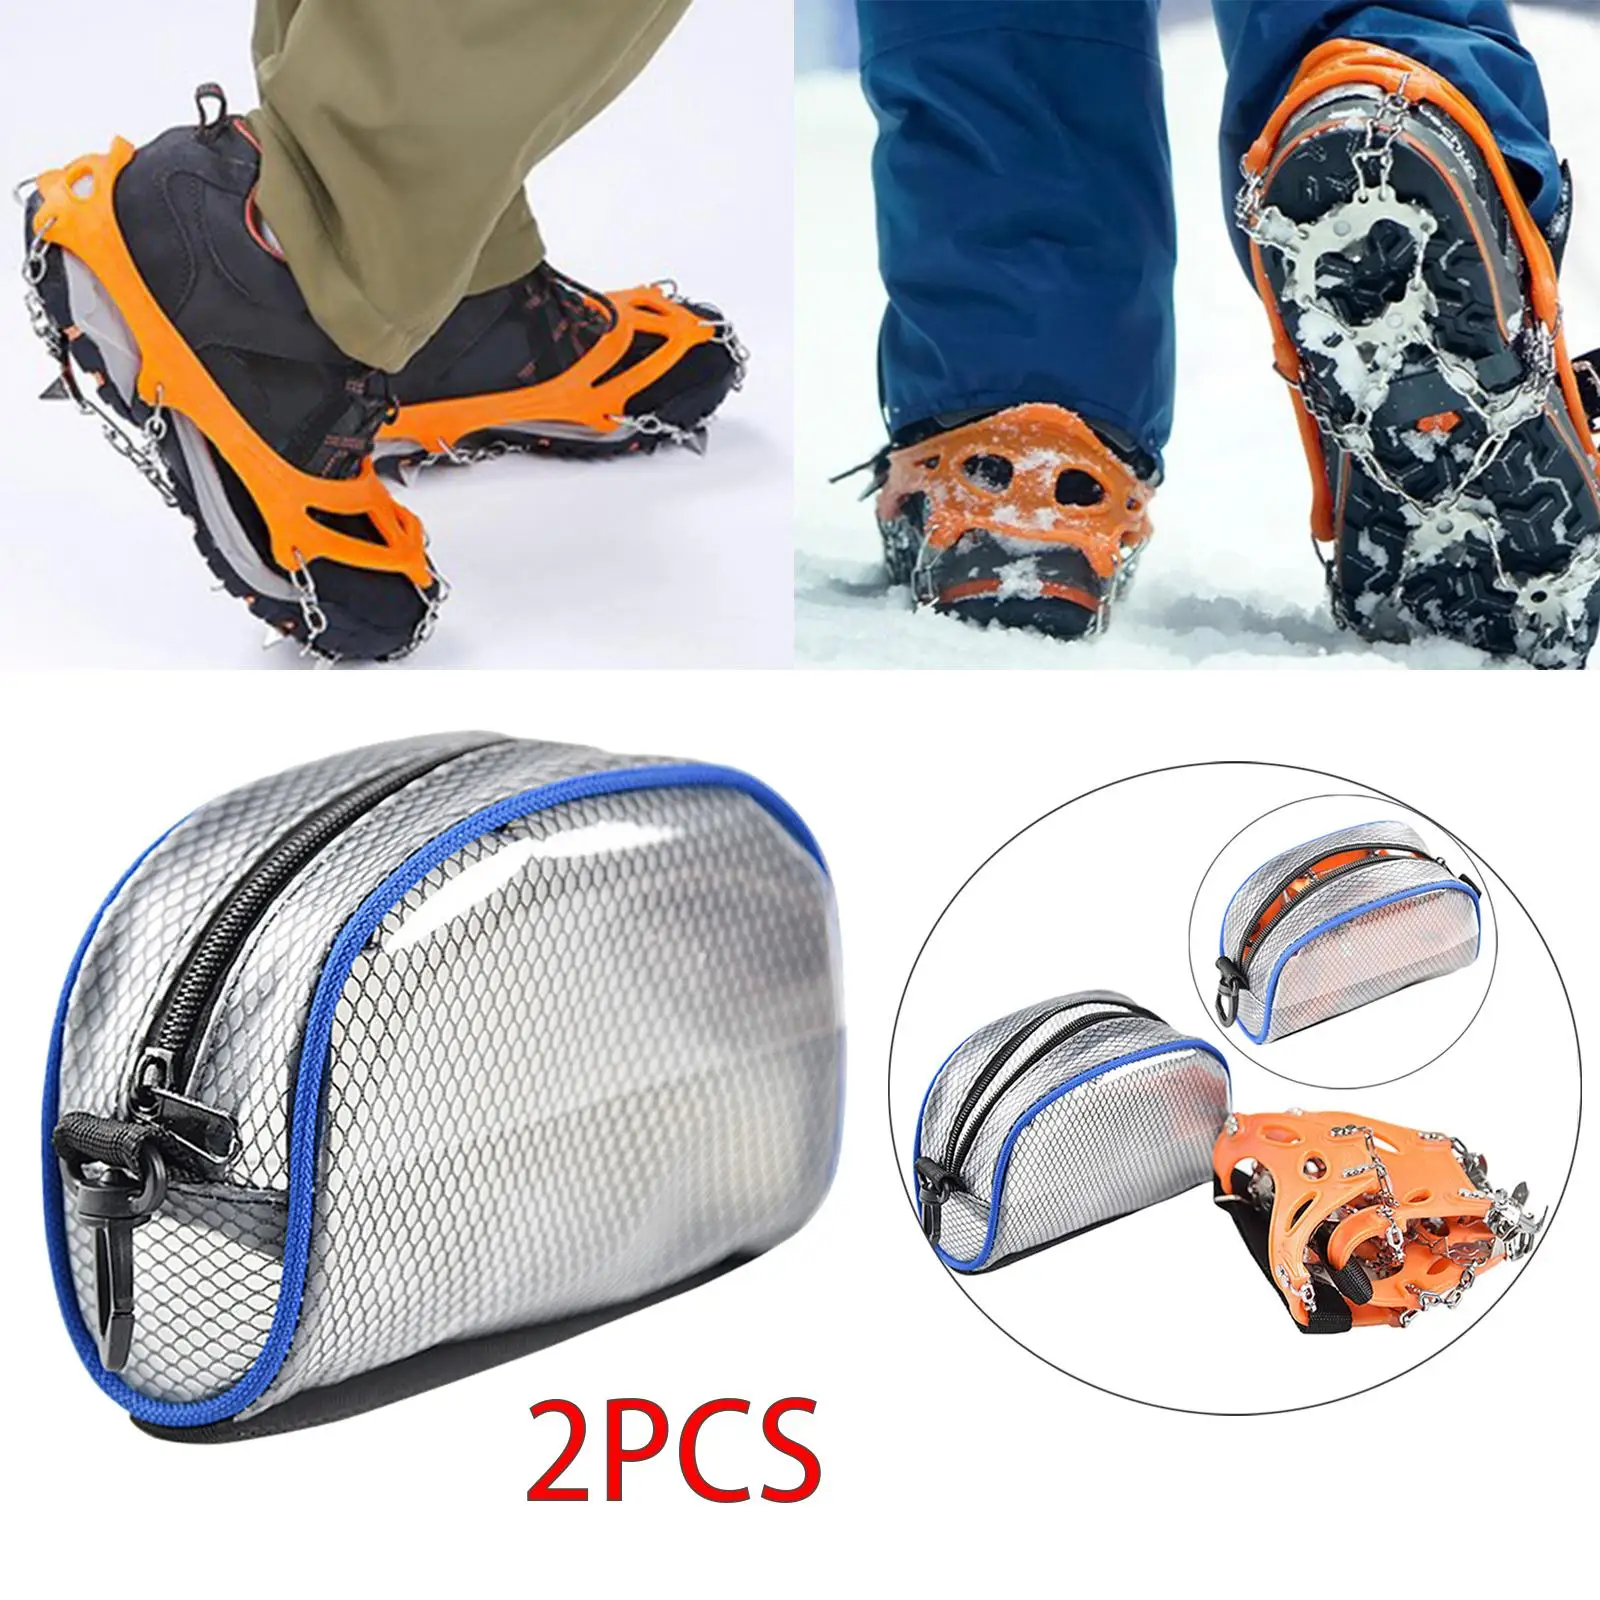 Outdoor Portable Crampon Bag Shoe Bag Cover Shoe Cover Ultralight Waterproof Holders for Walking Adventure Jogging Hiking Sports